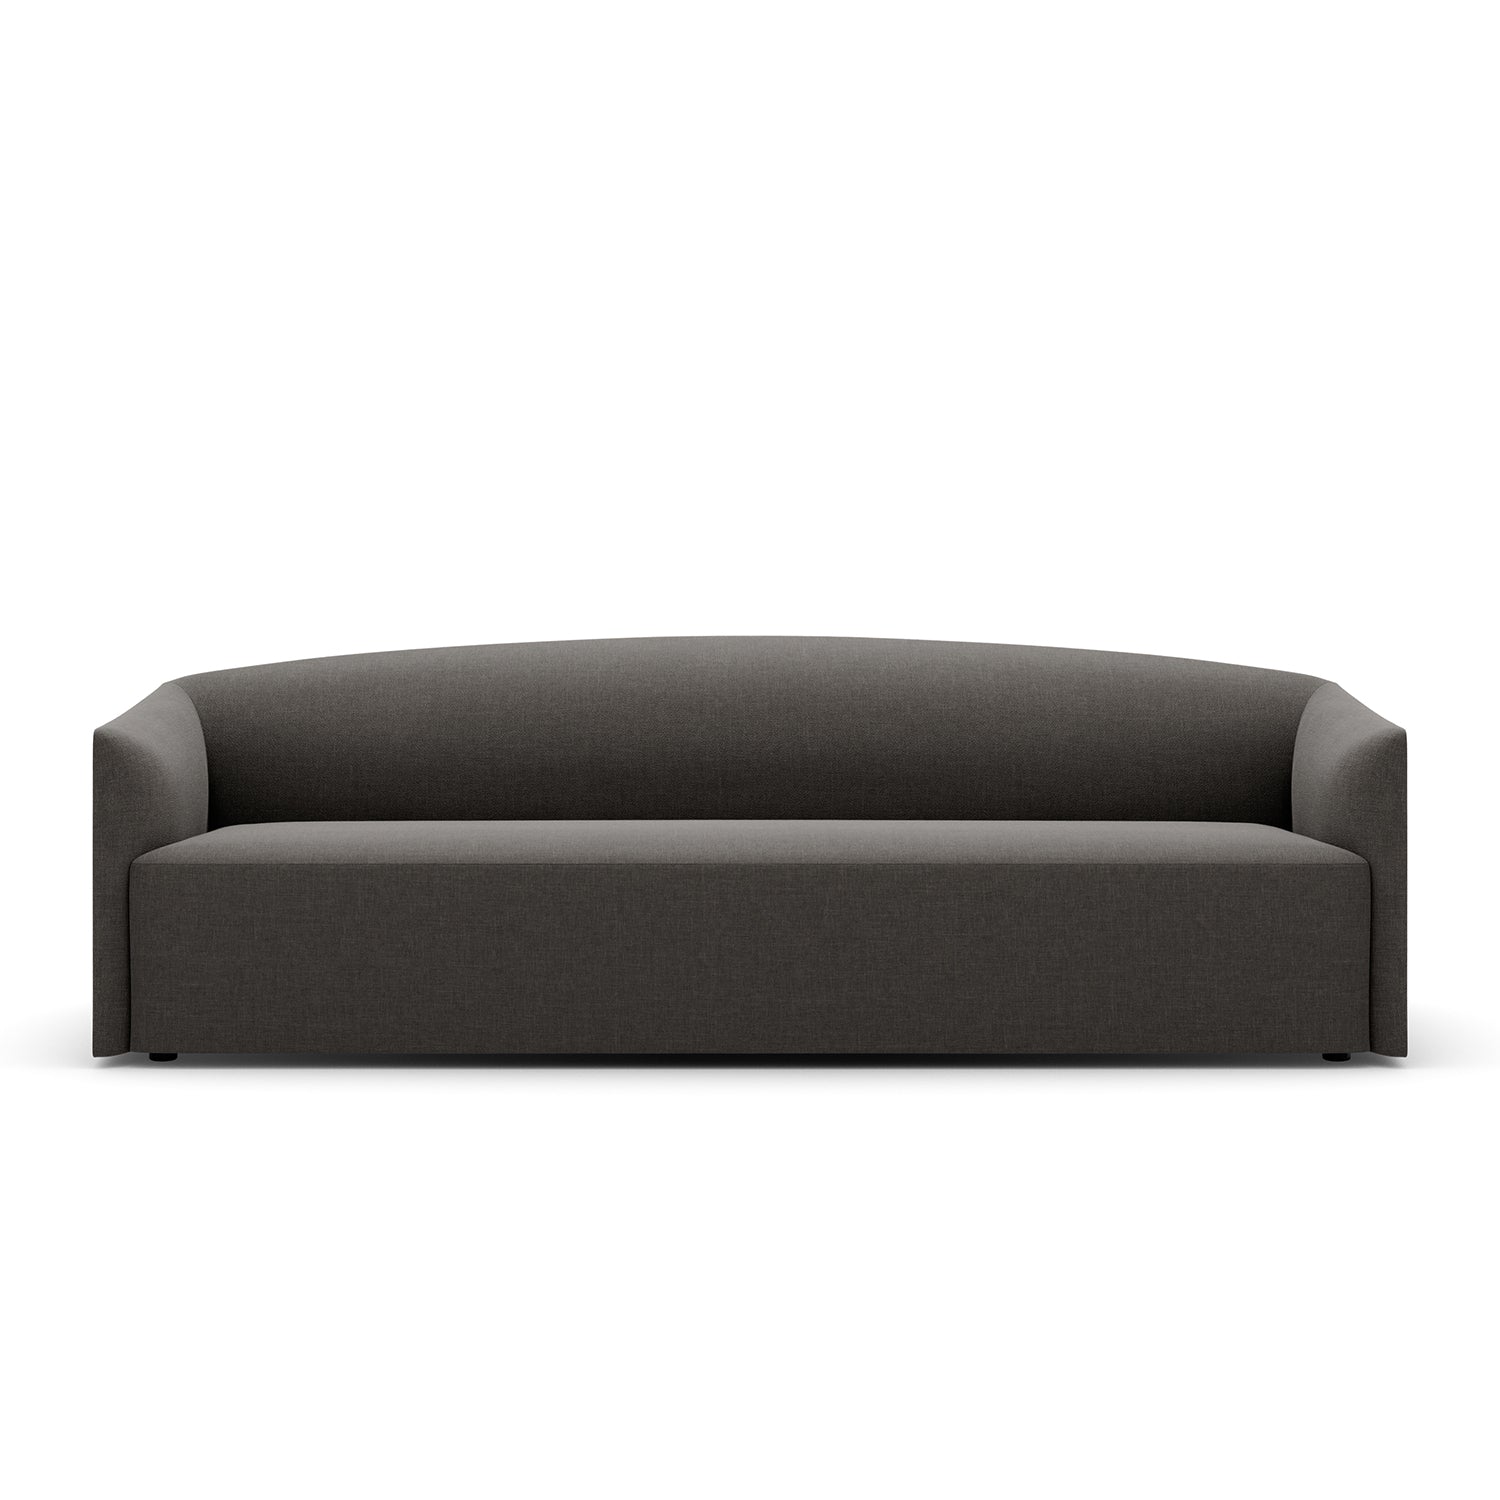 New Works Shore 3 Seater Sofa in Lava Rock